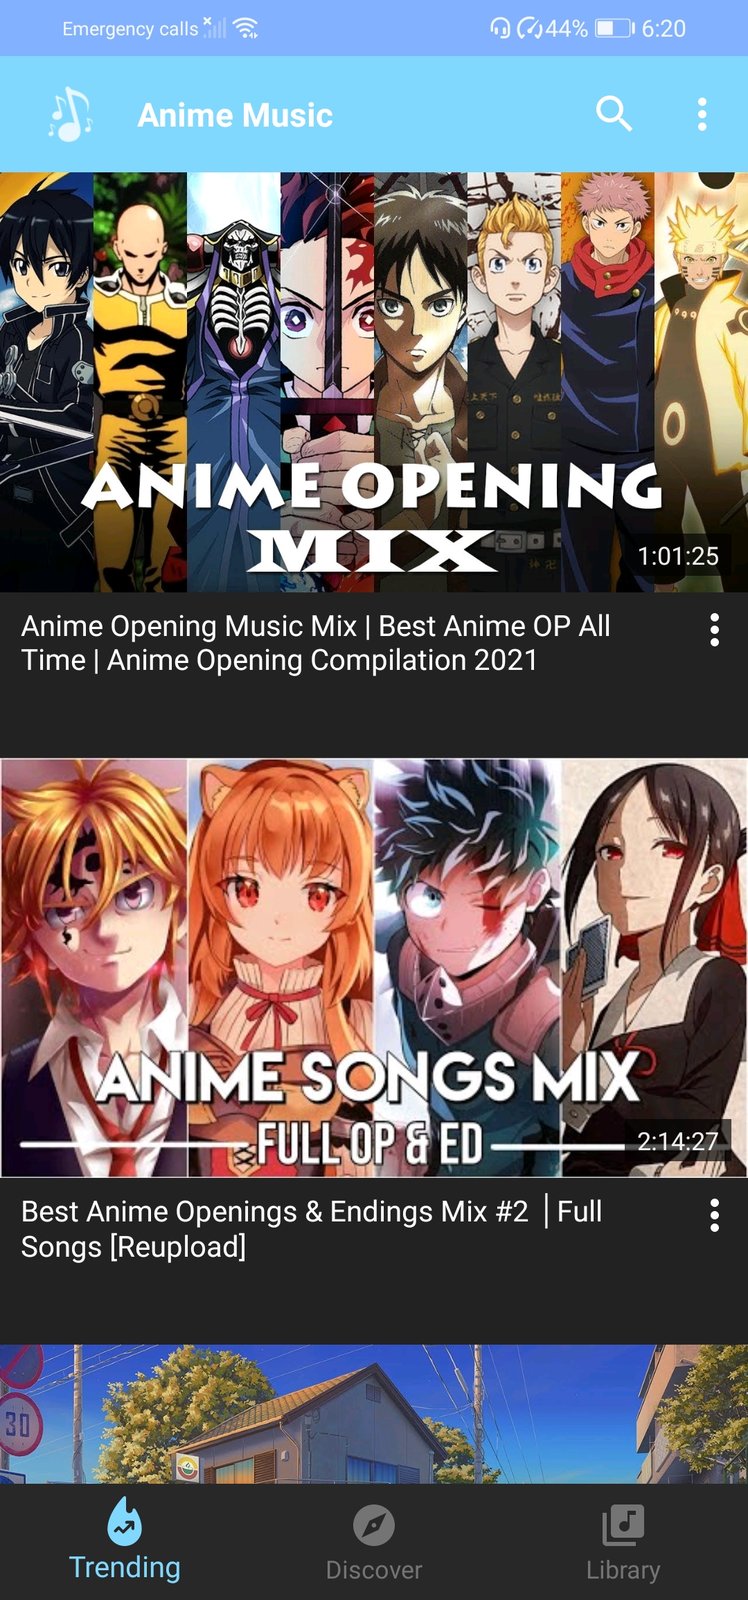 6 Best Anime Openings of All Time